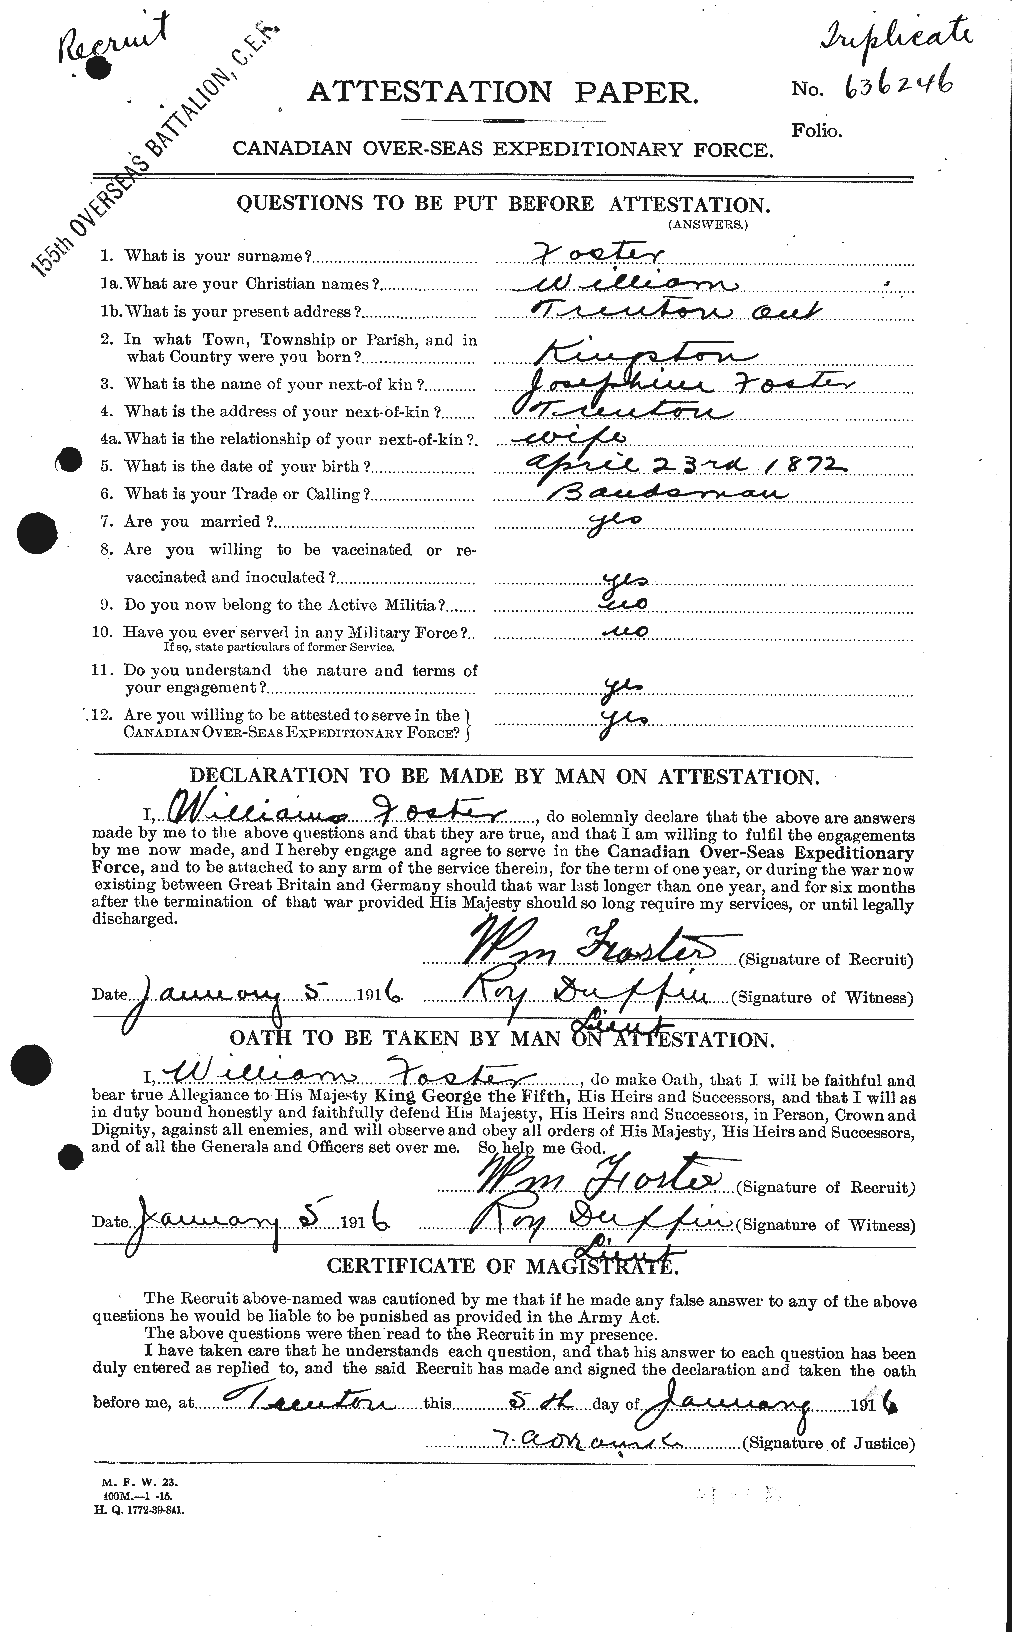 Personnel Records of the First World War - CEF 328723a